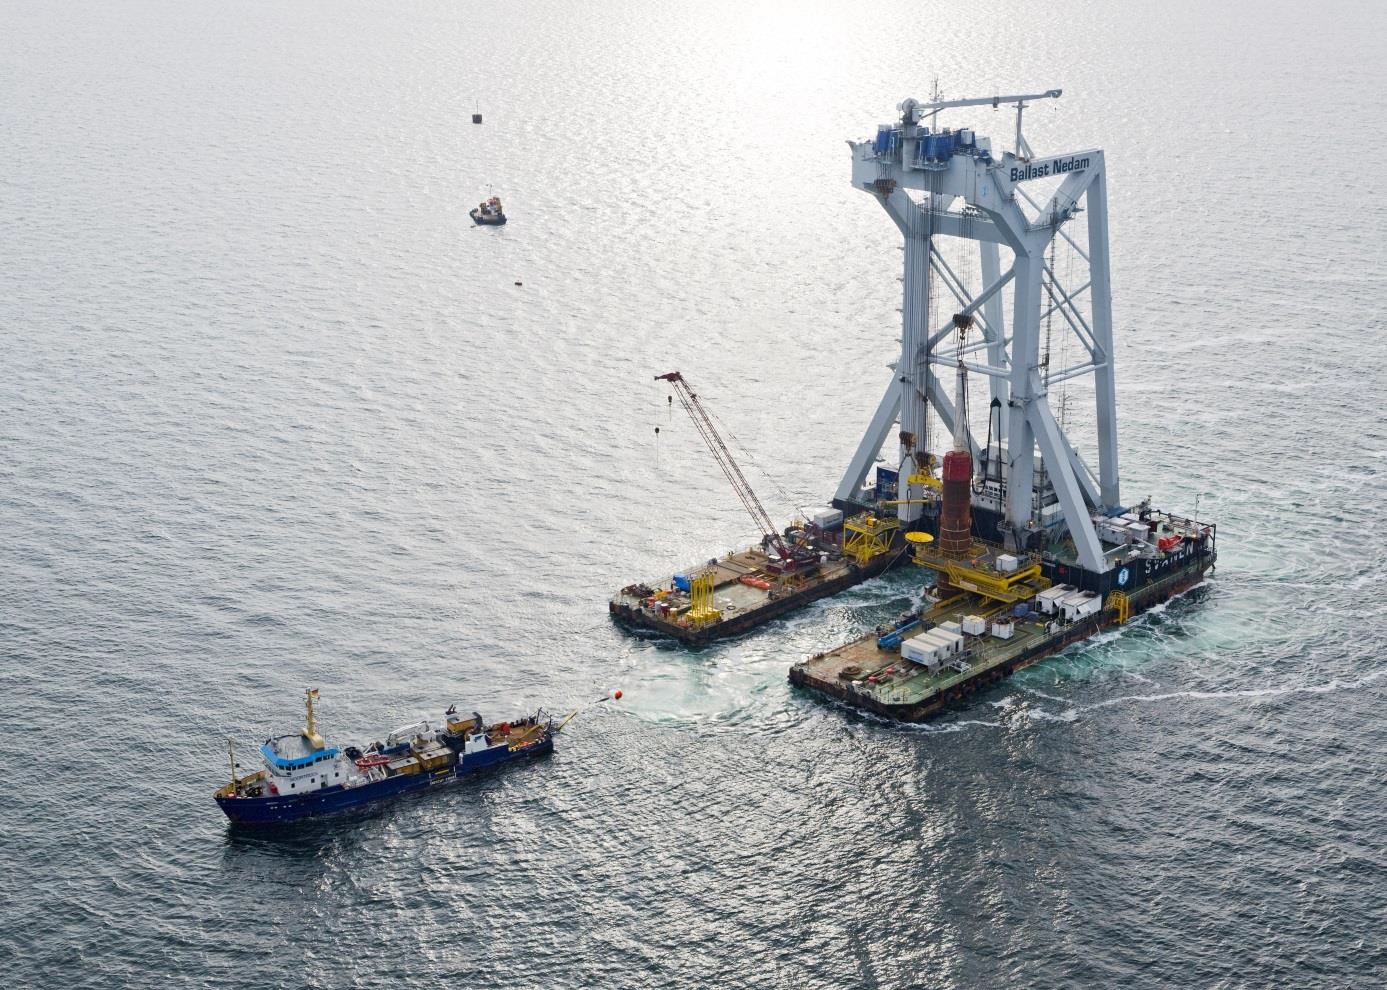 Ballast Nedam Installs Its 500th Foundation | Offshore Wind How Long Does A Ballast Last